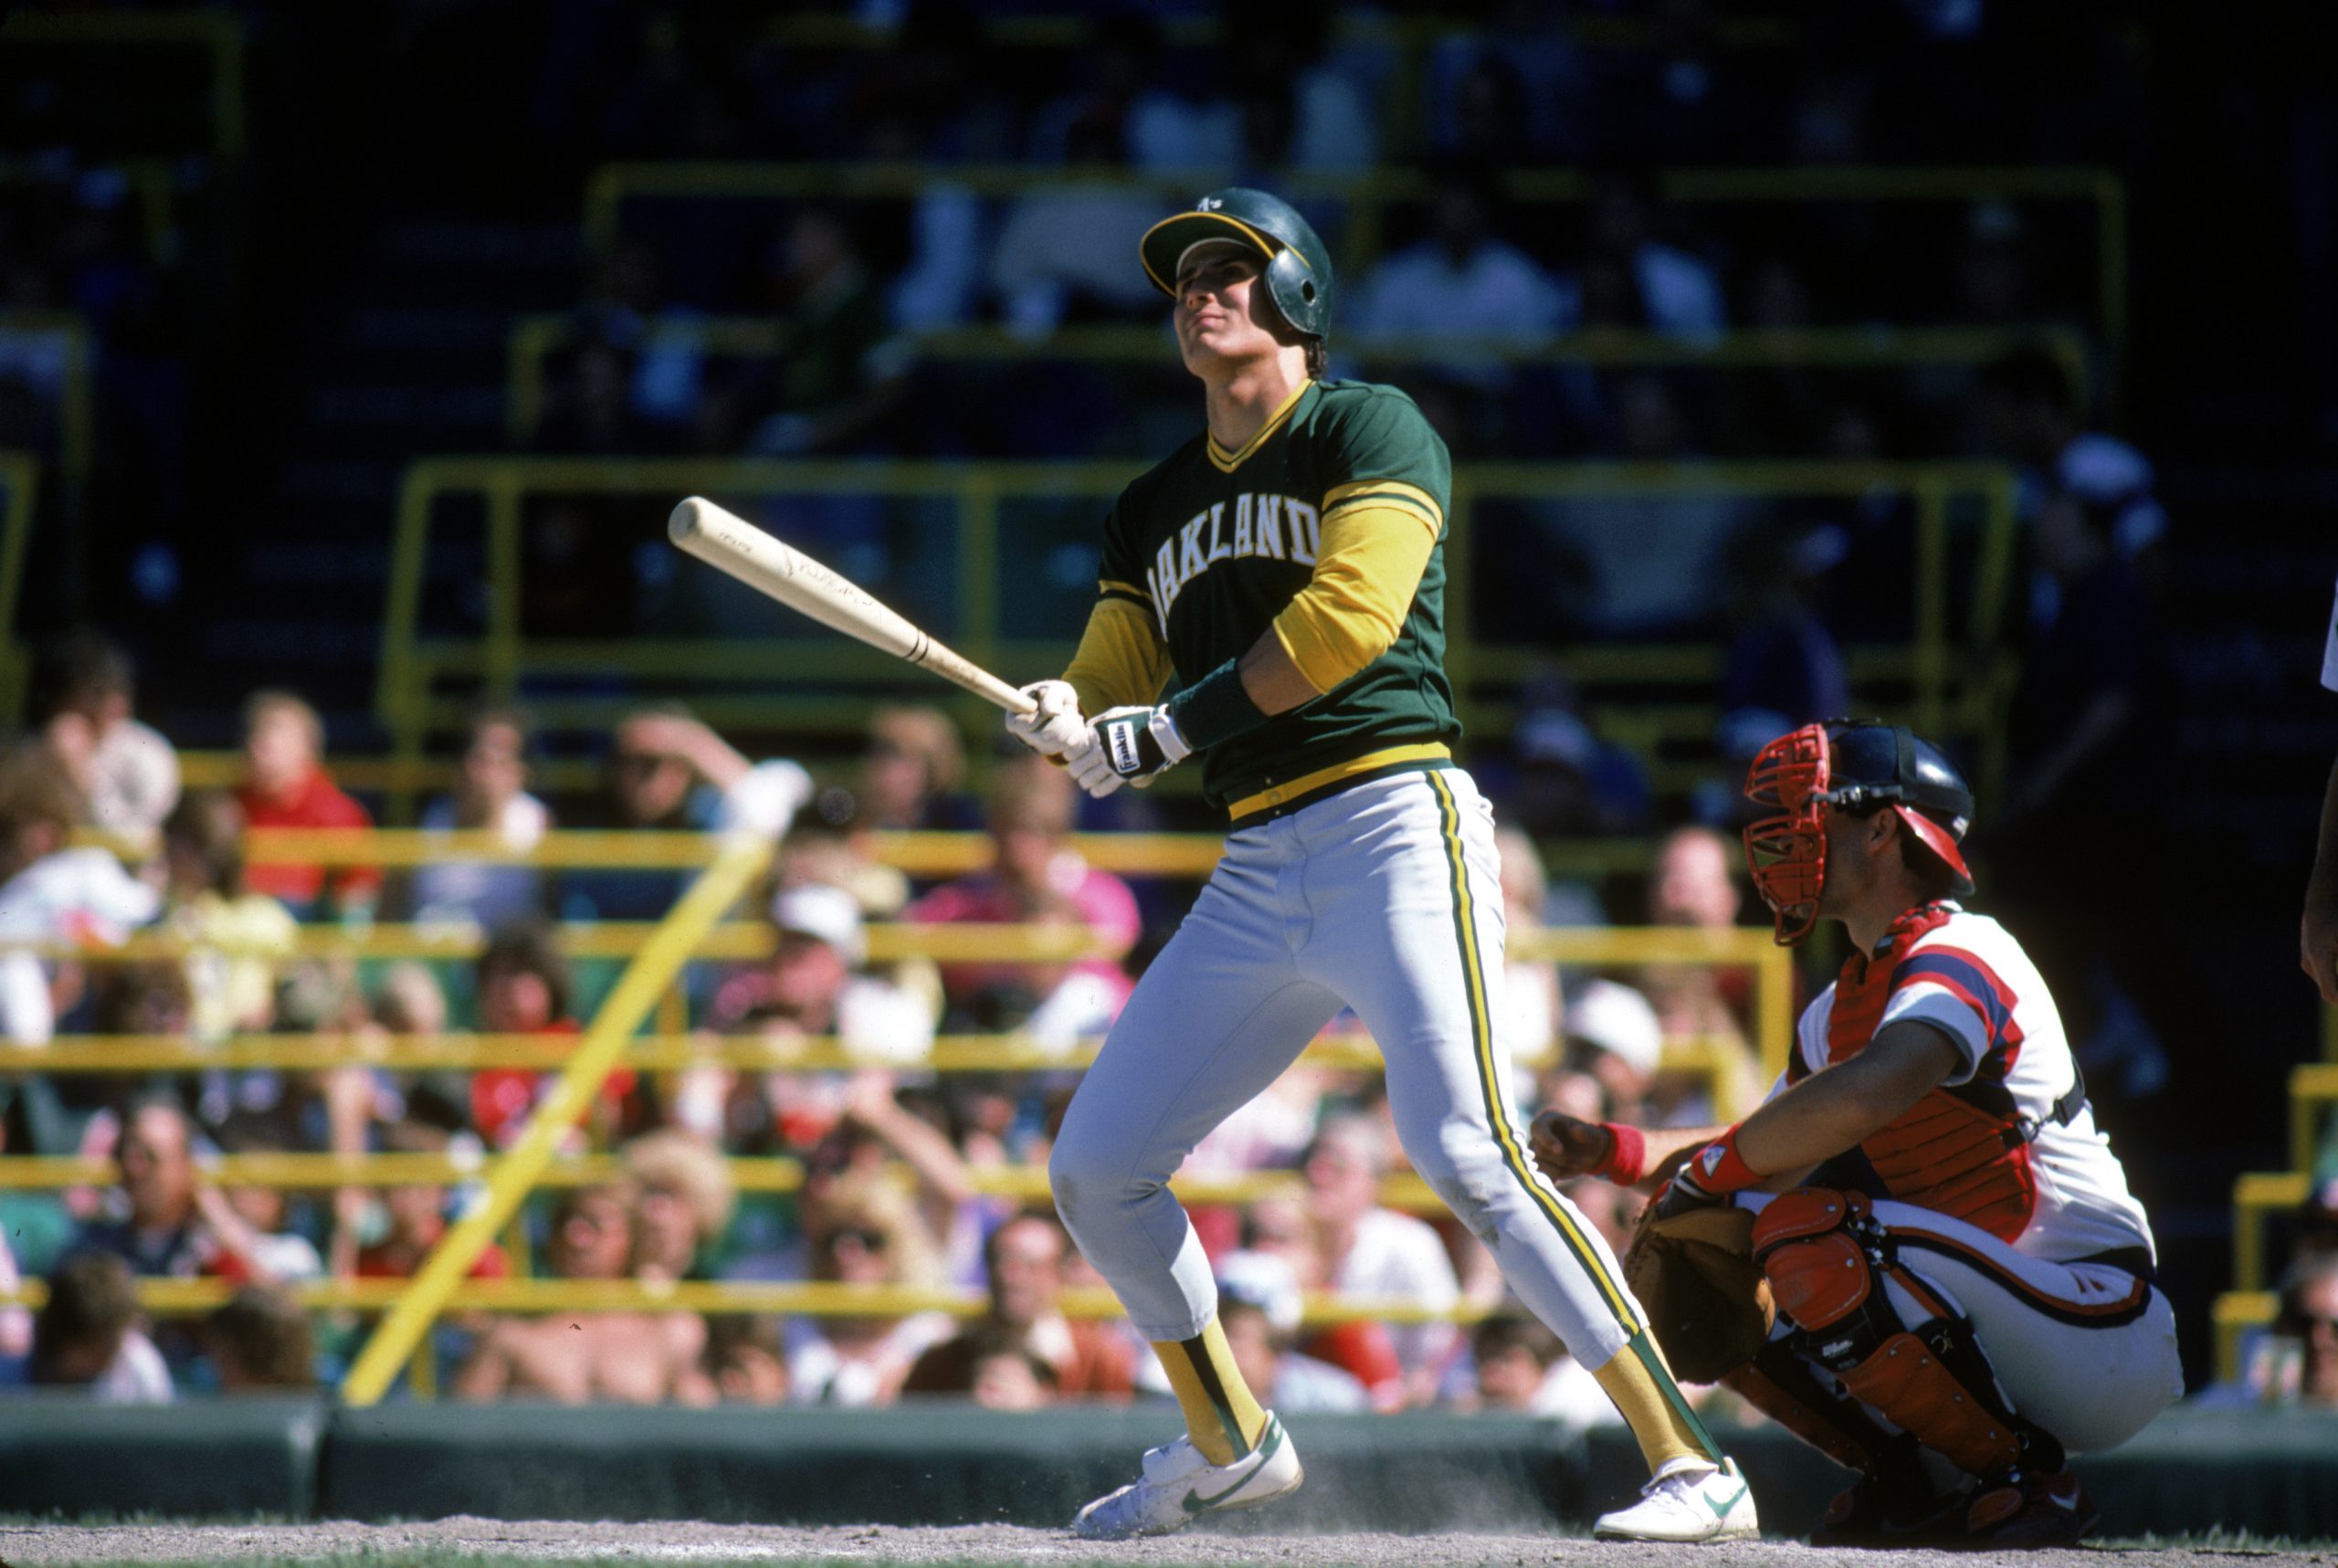 No Way, Jose: Jose Canseco May Have Now Officially Hit a New Low